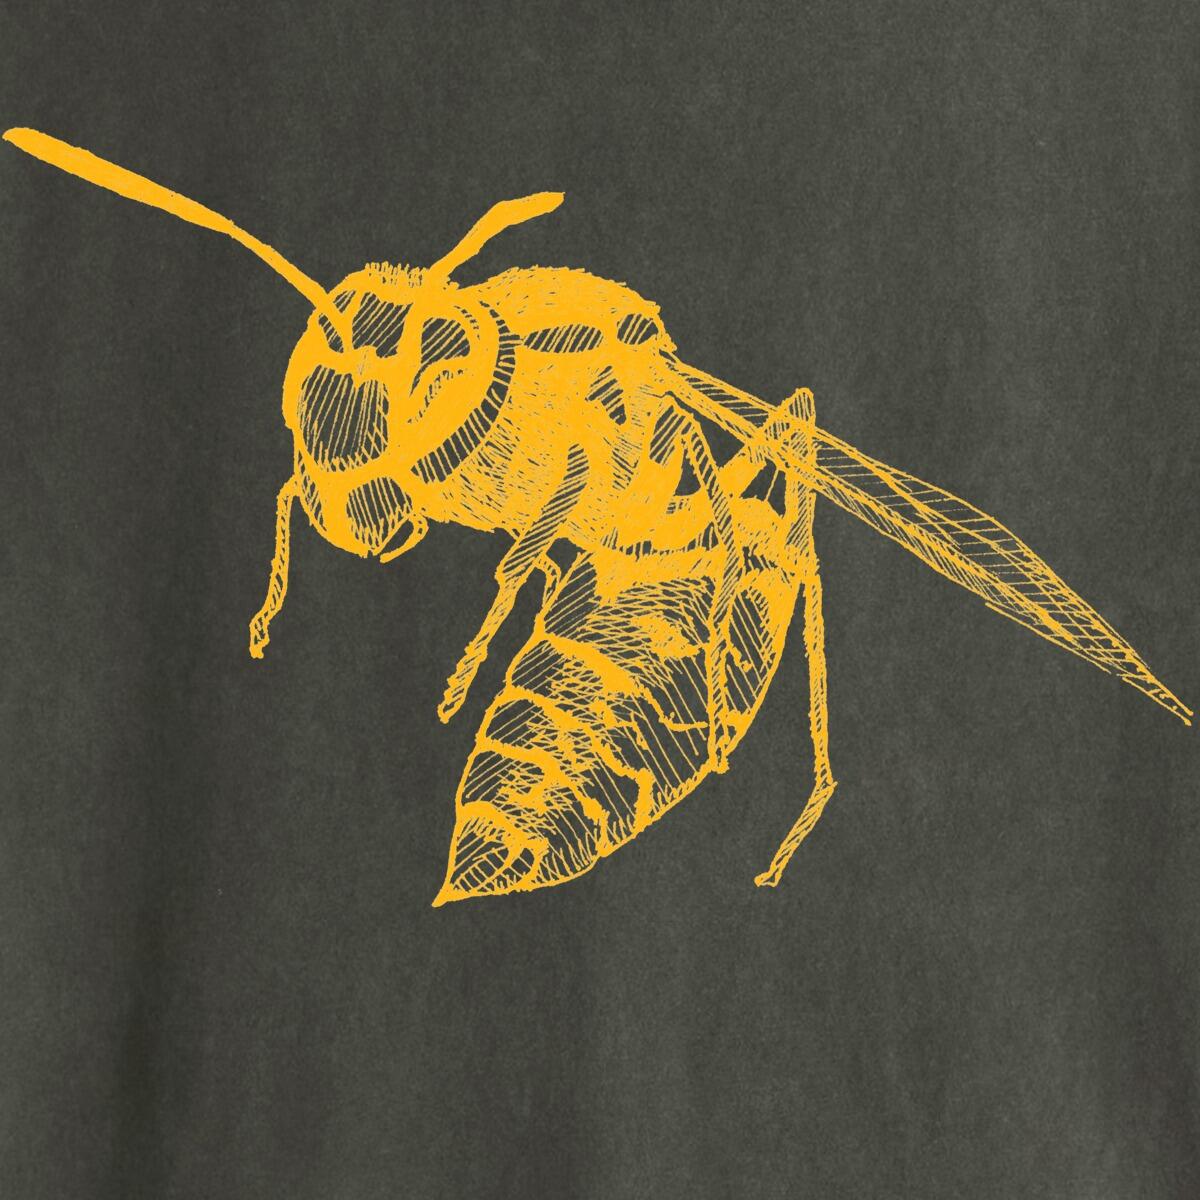 Wasp drawing in yellow